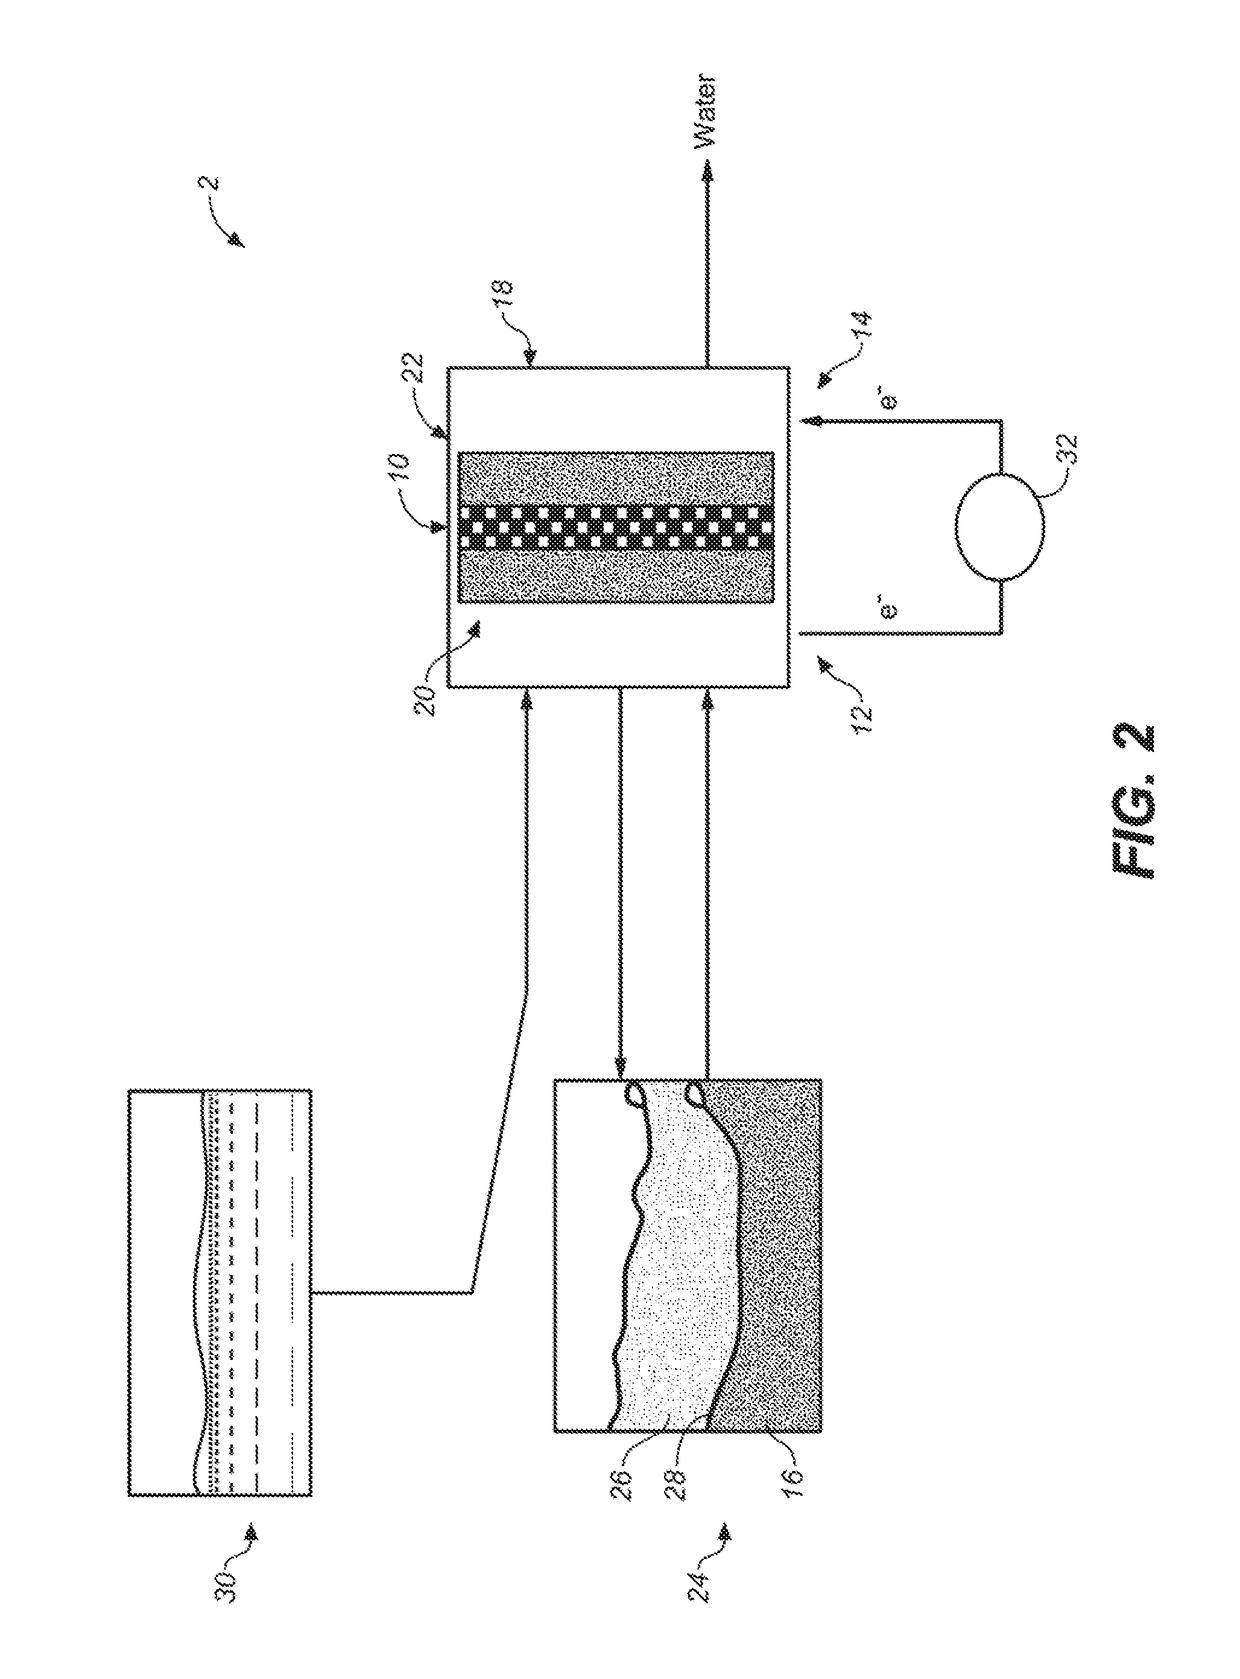 System and method for electrochemical energy conversion and storage